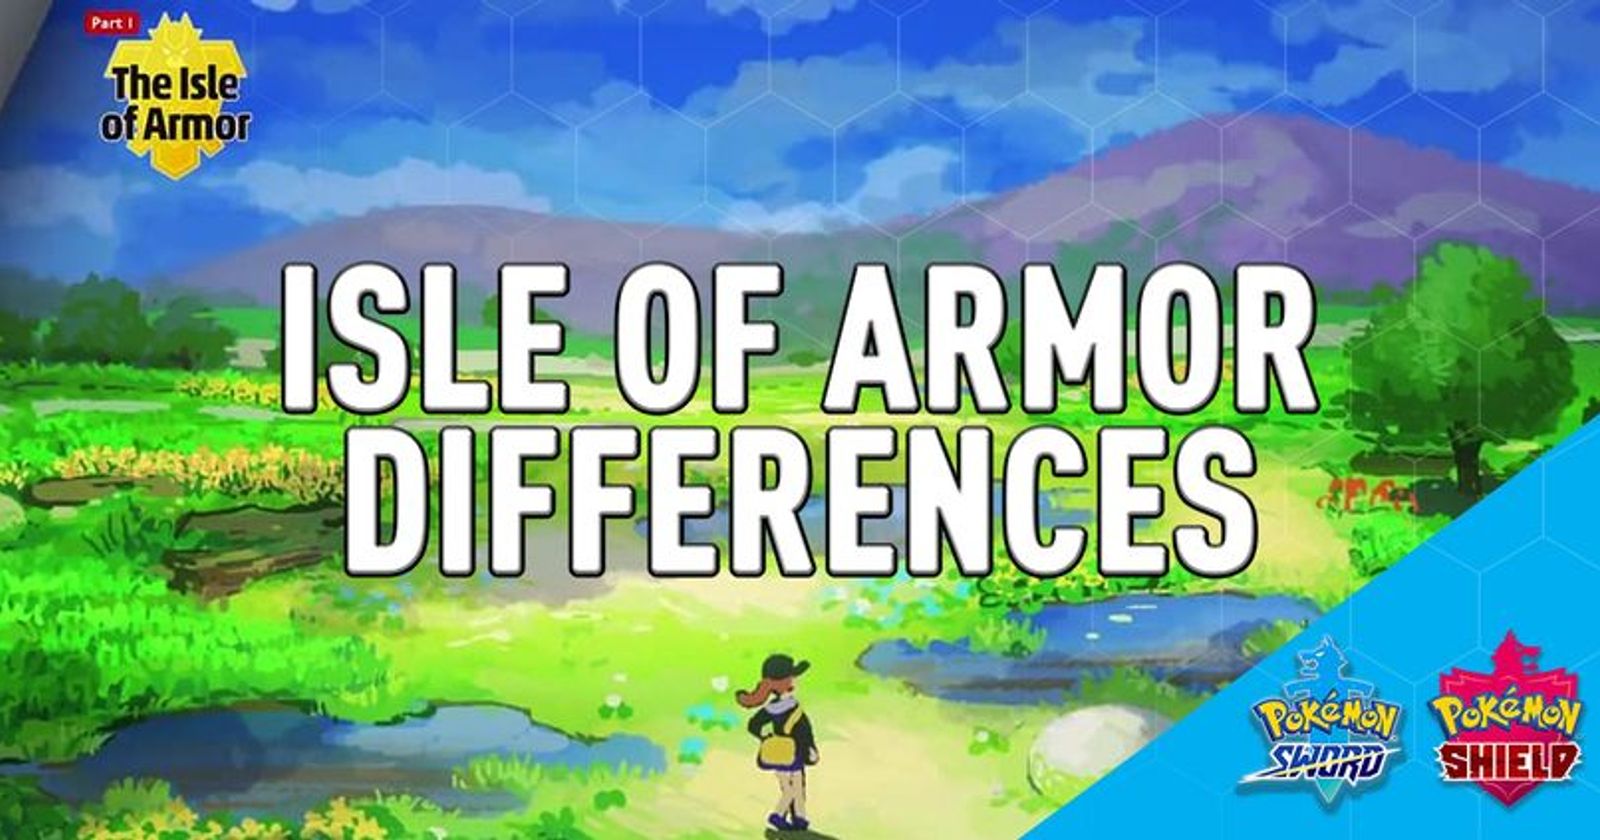 Pokémon Sword and Shield differences: Which version should you buy?